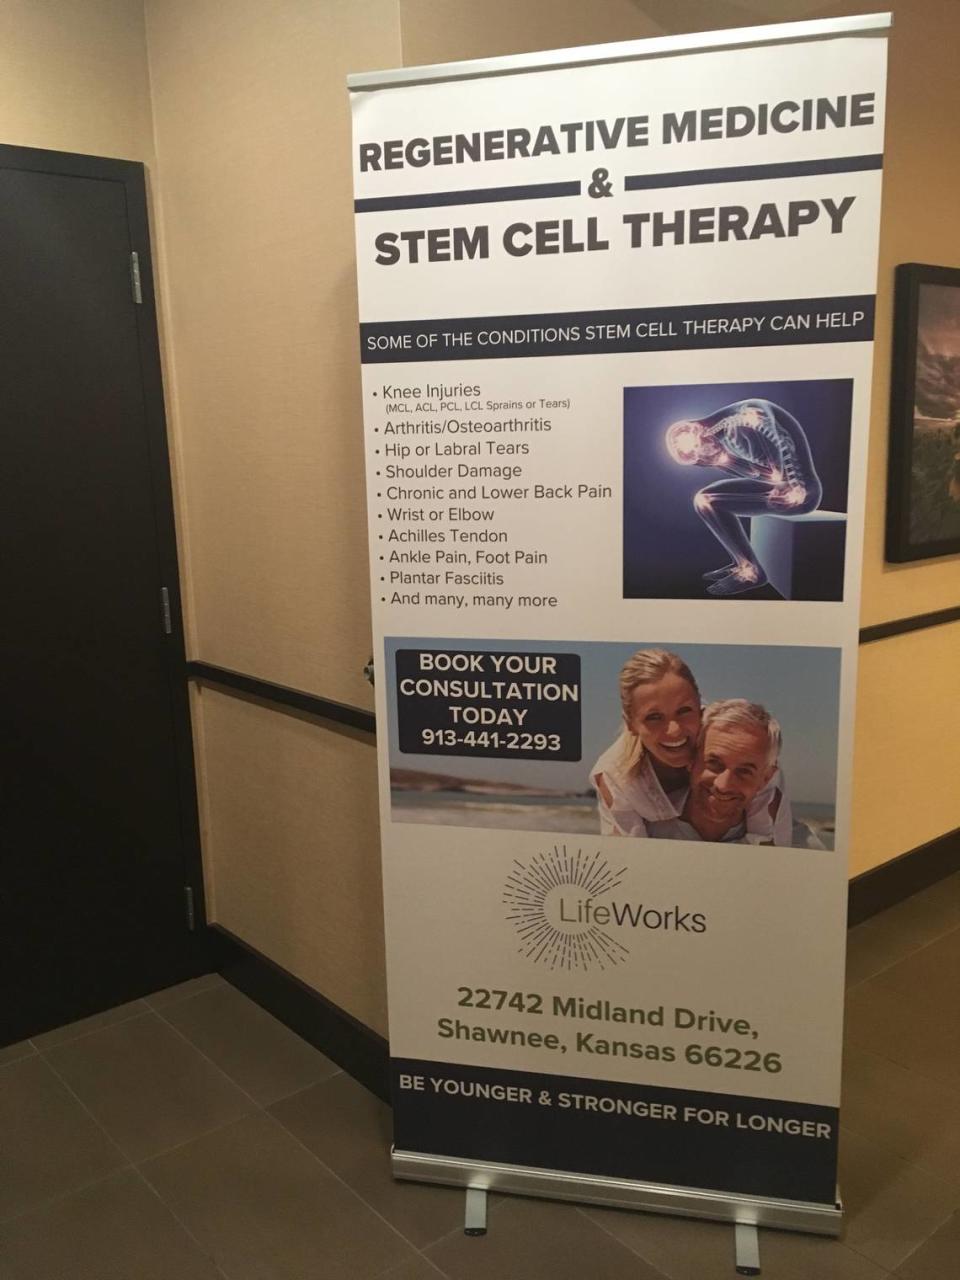 An advertisement outside of Matt Gianforte’s Lifeworks seminar in Lenexa said that stem cells can be used to treat a wide variety of orthopedic conditions. But researchers say that’s not proven.